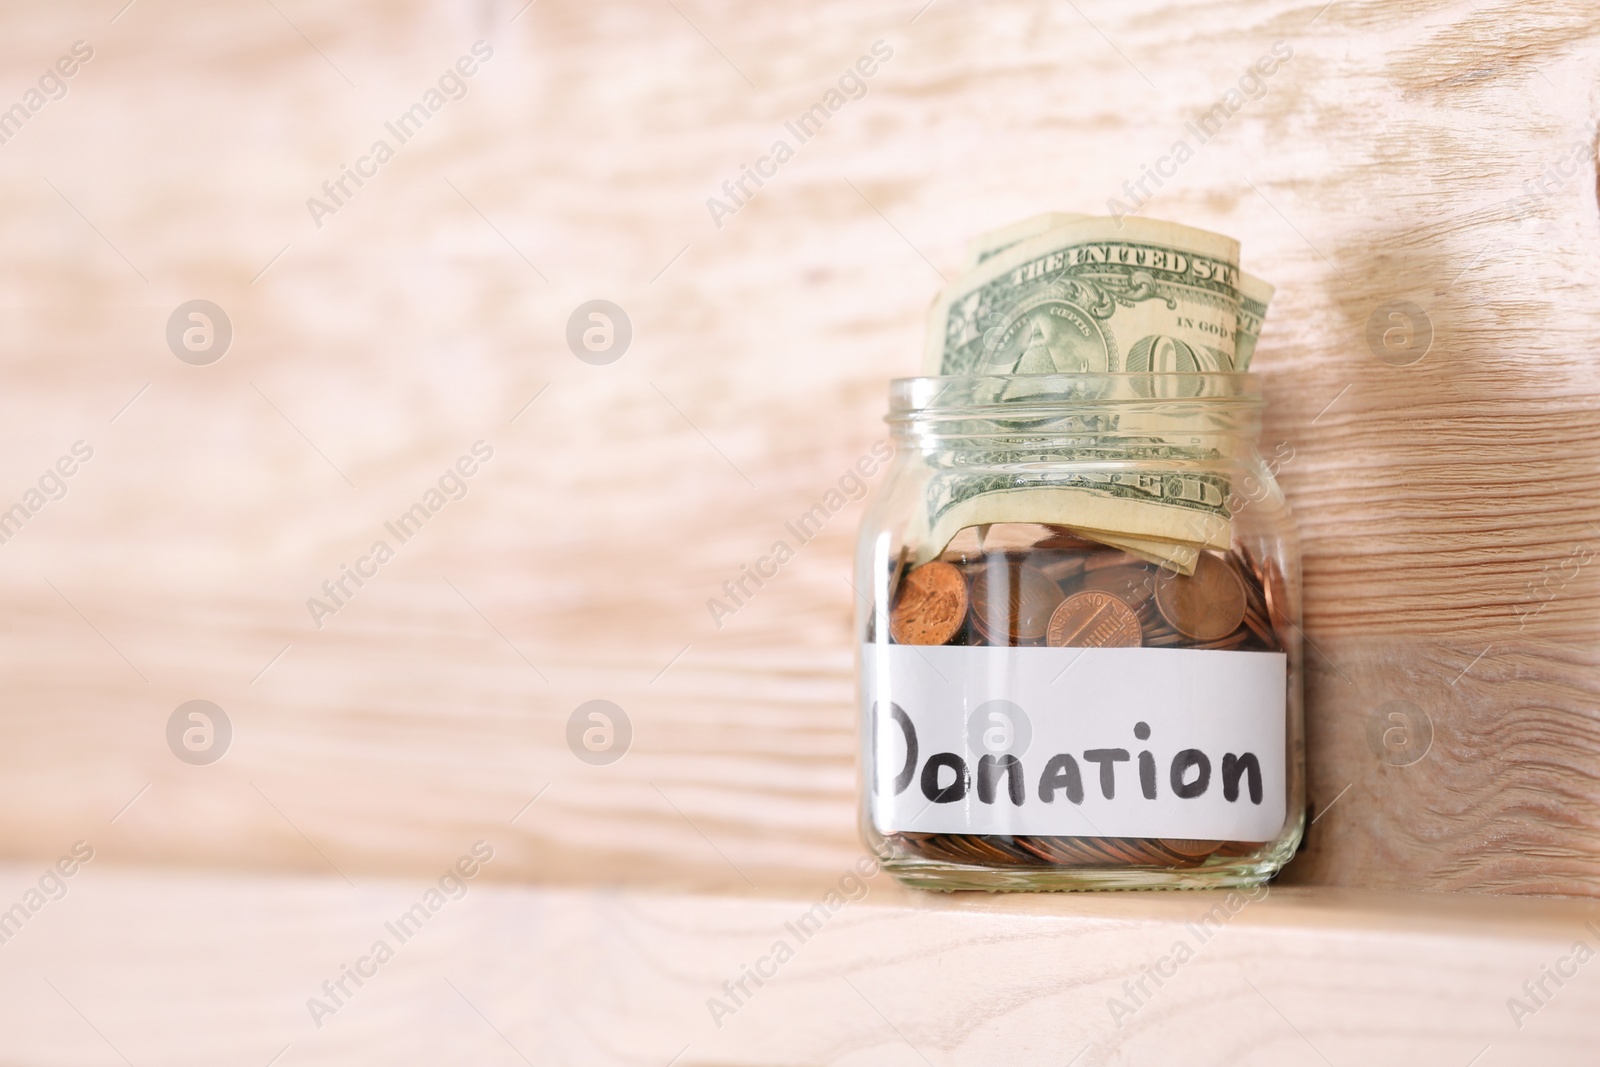 Photo of Glass jar with money and label DONATION on shelf against wooden background. Space for text